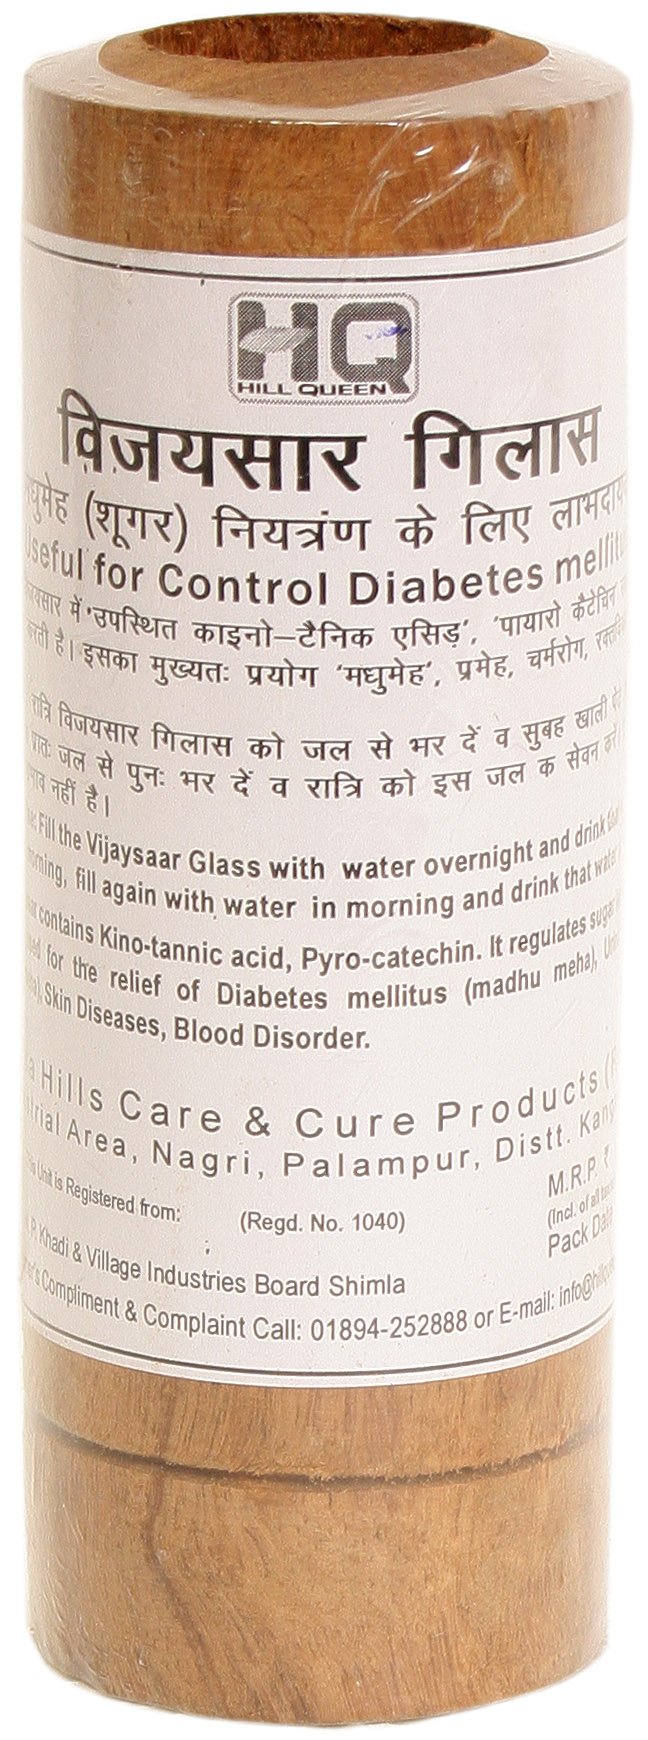 Vijay Saar Tumblers (A Natural Way to Control Diabetes and Overweight) - book cover